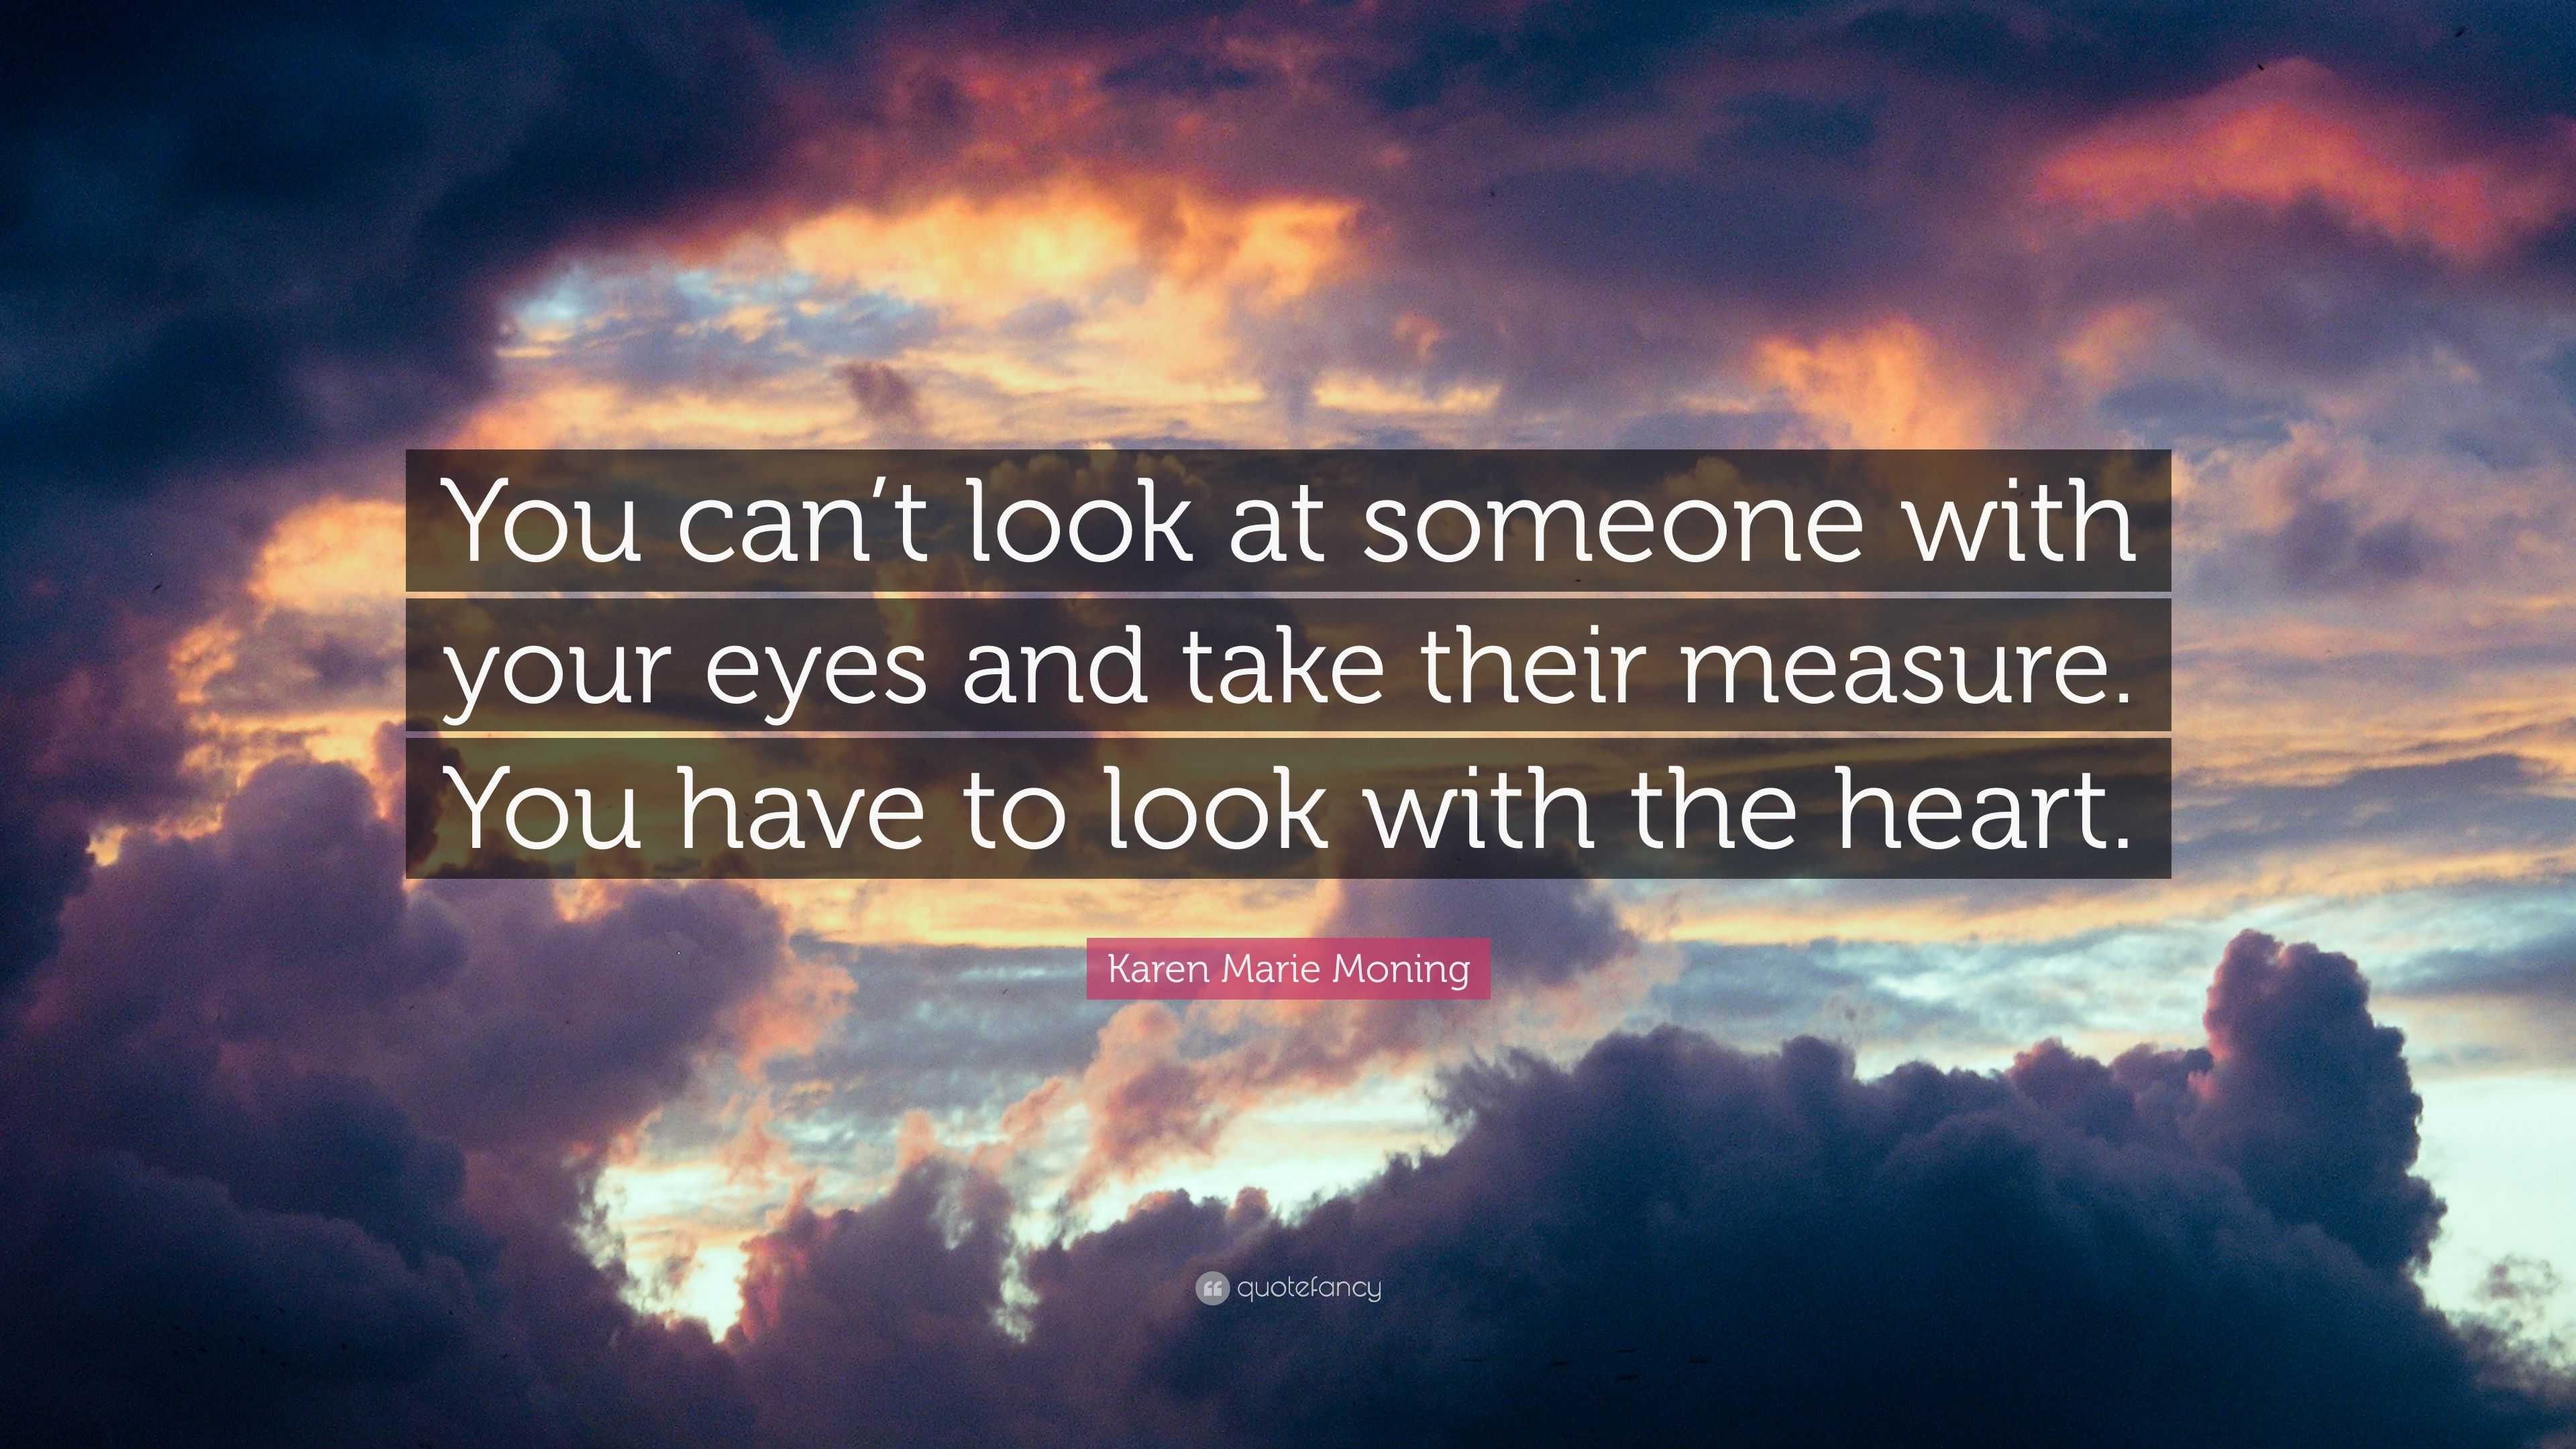 Karen Marie Moning Quote: “You can’t look at someone with your eyes and ...